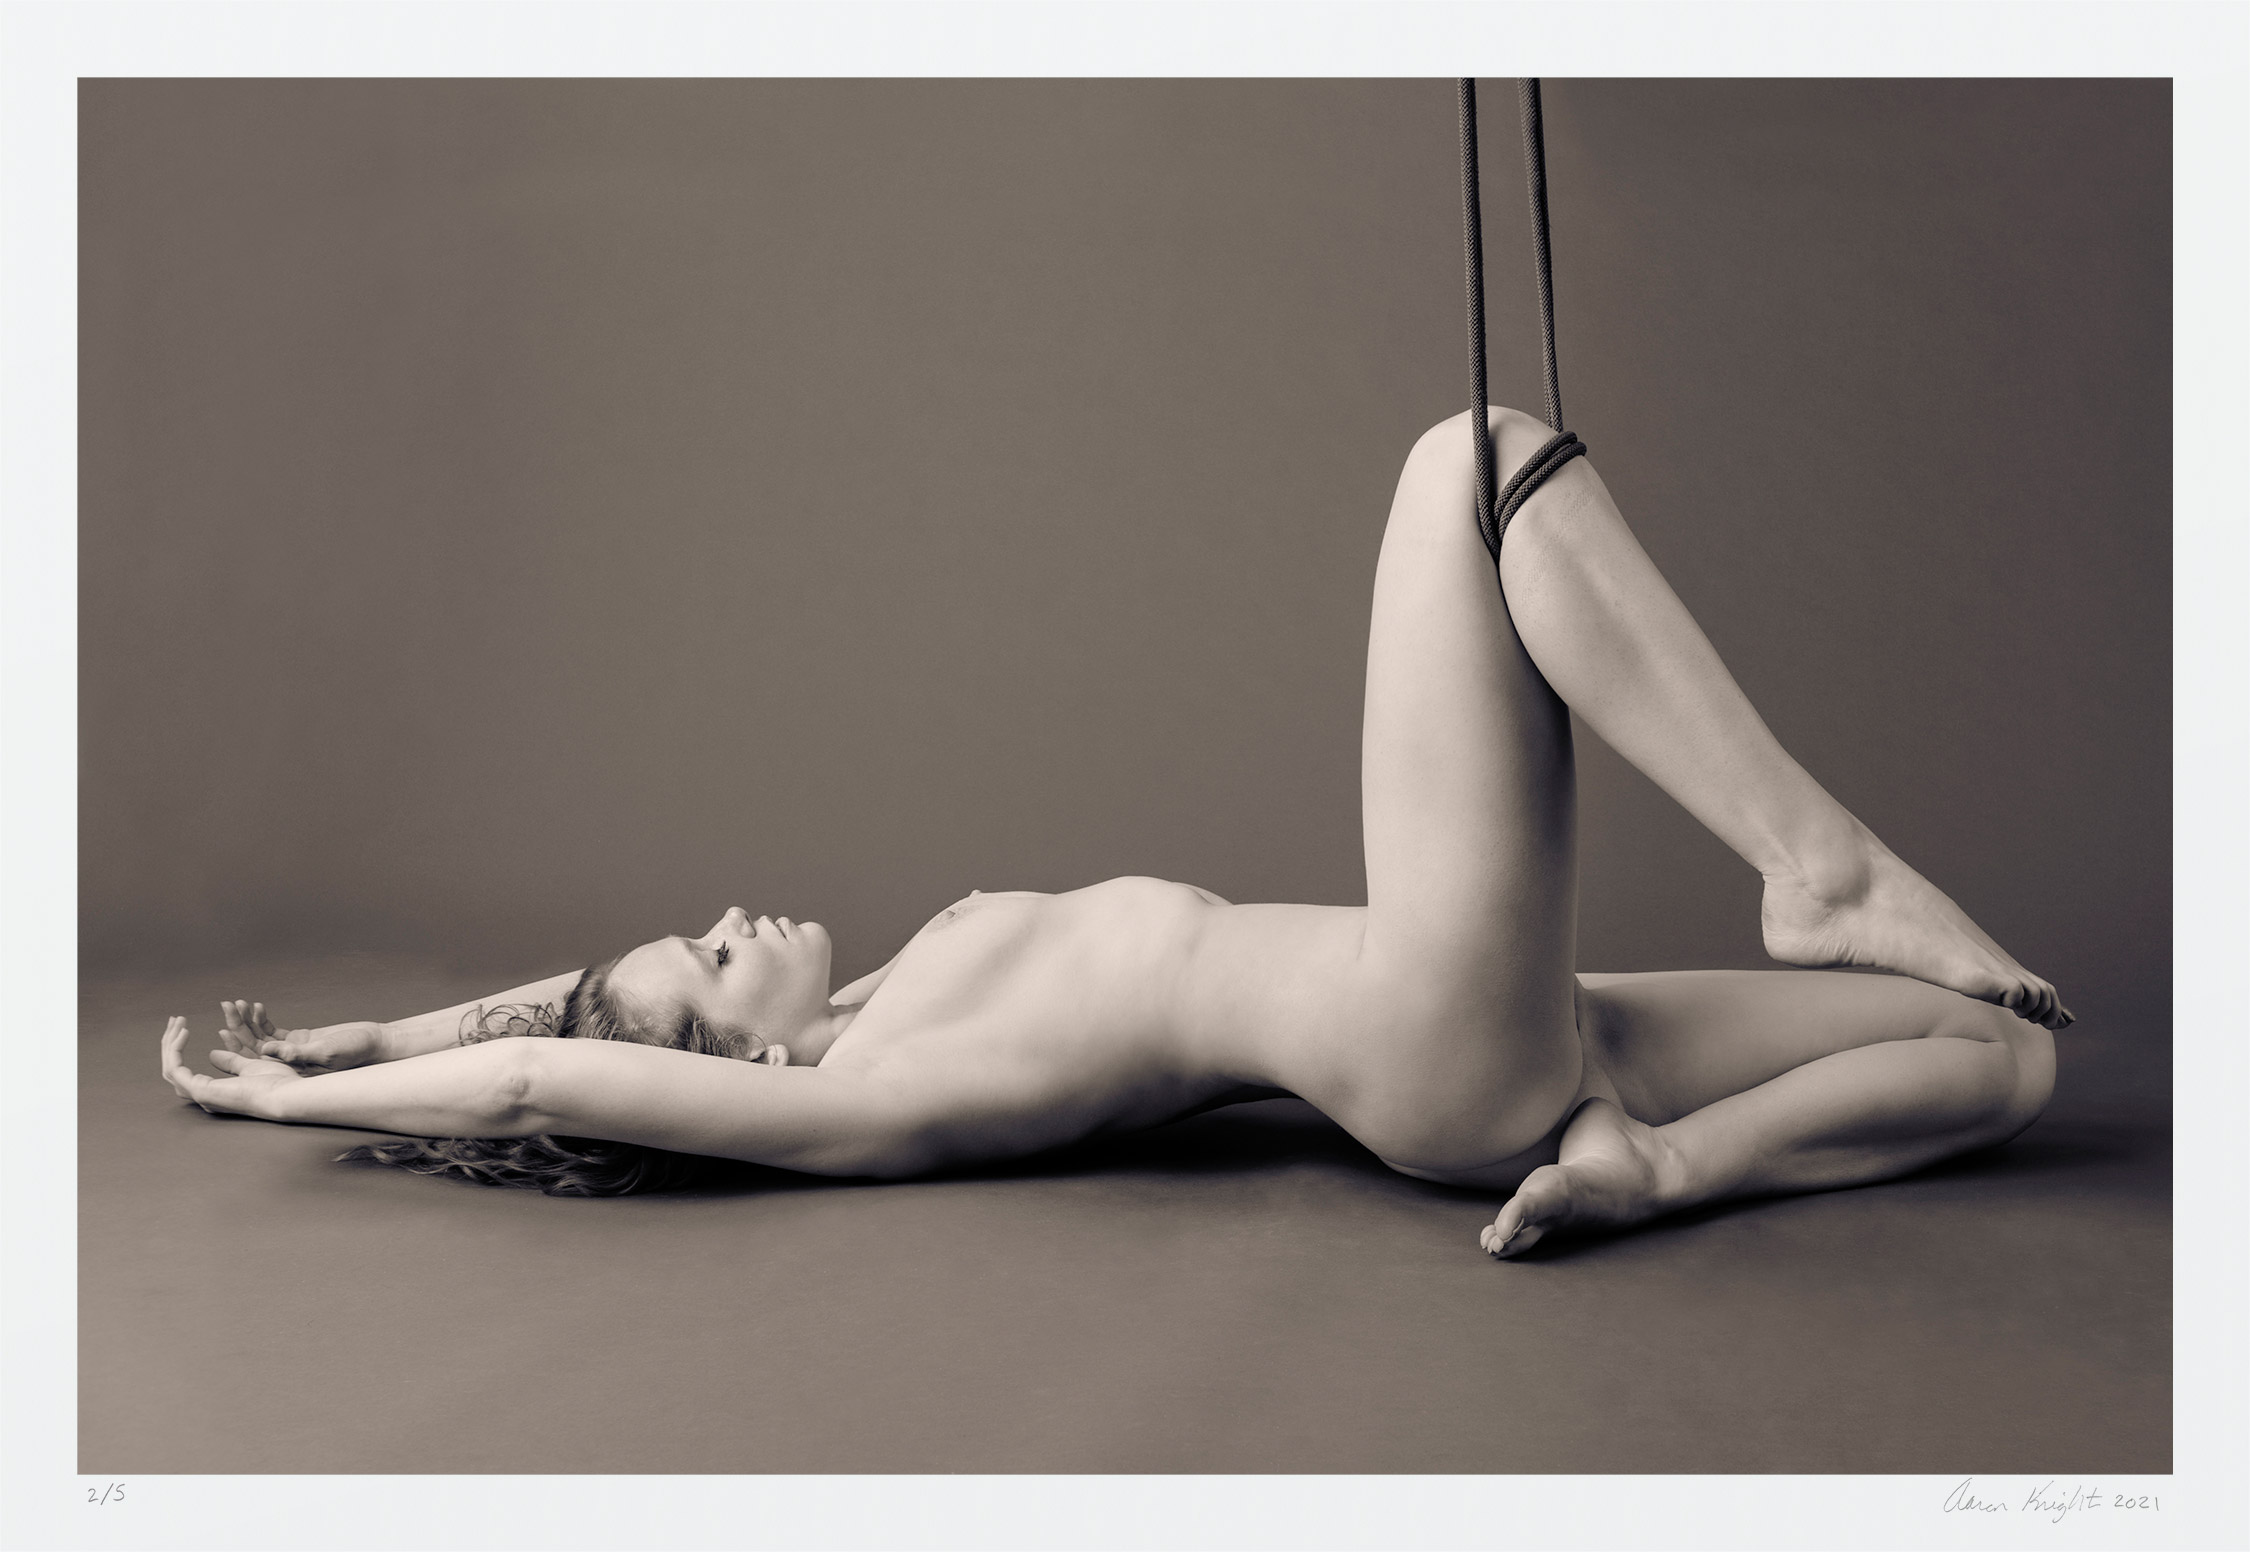 Monochrome nudes photography, limited edition by Aaron Knight